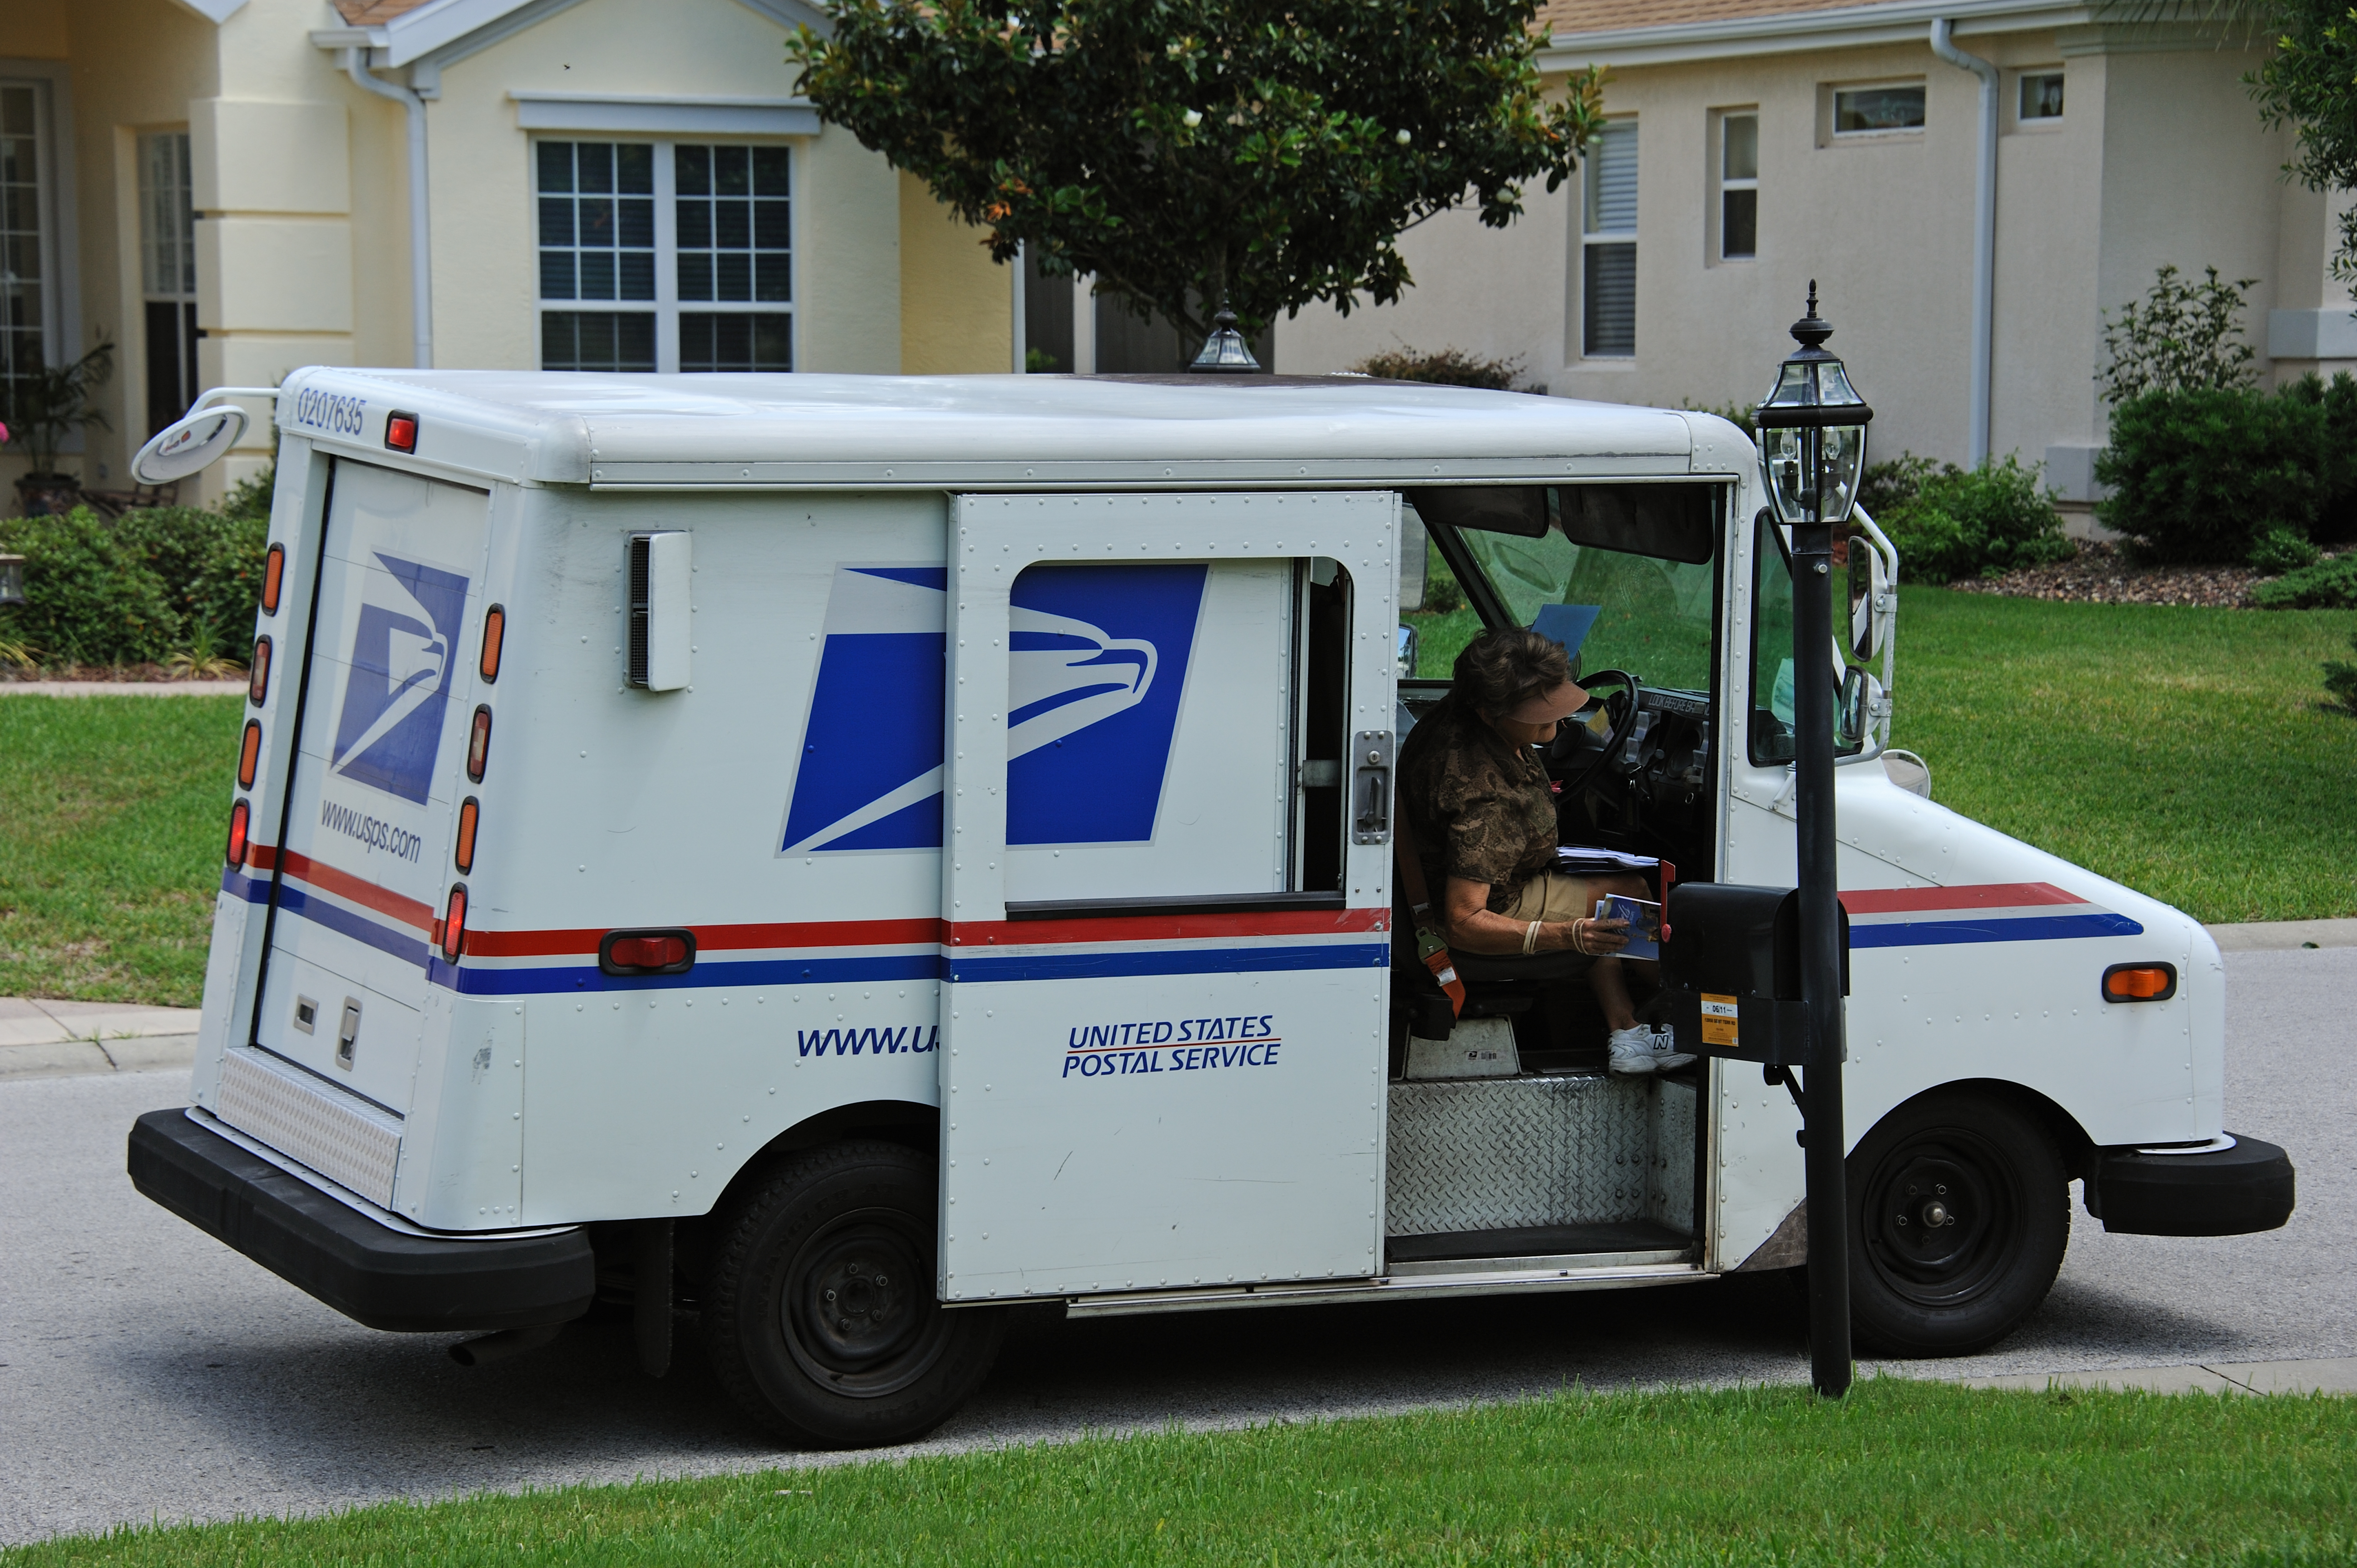 How is the U.S. Postal Service governed and funded?